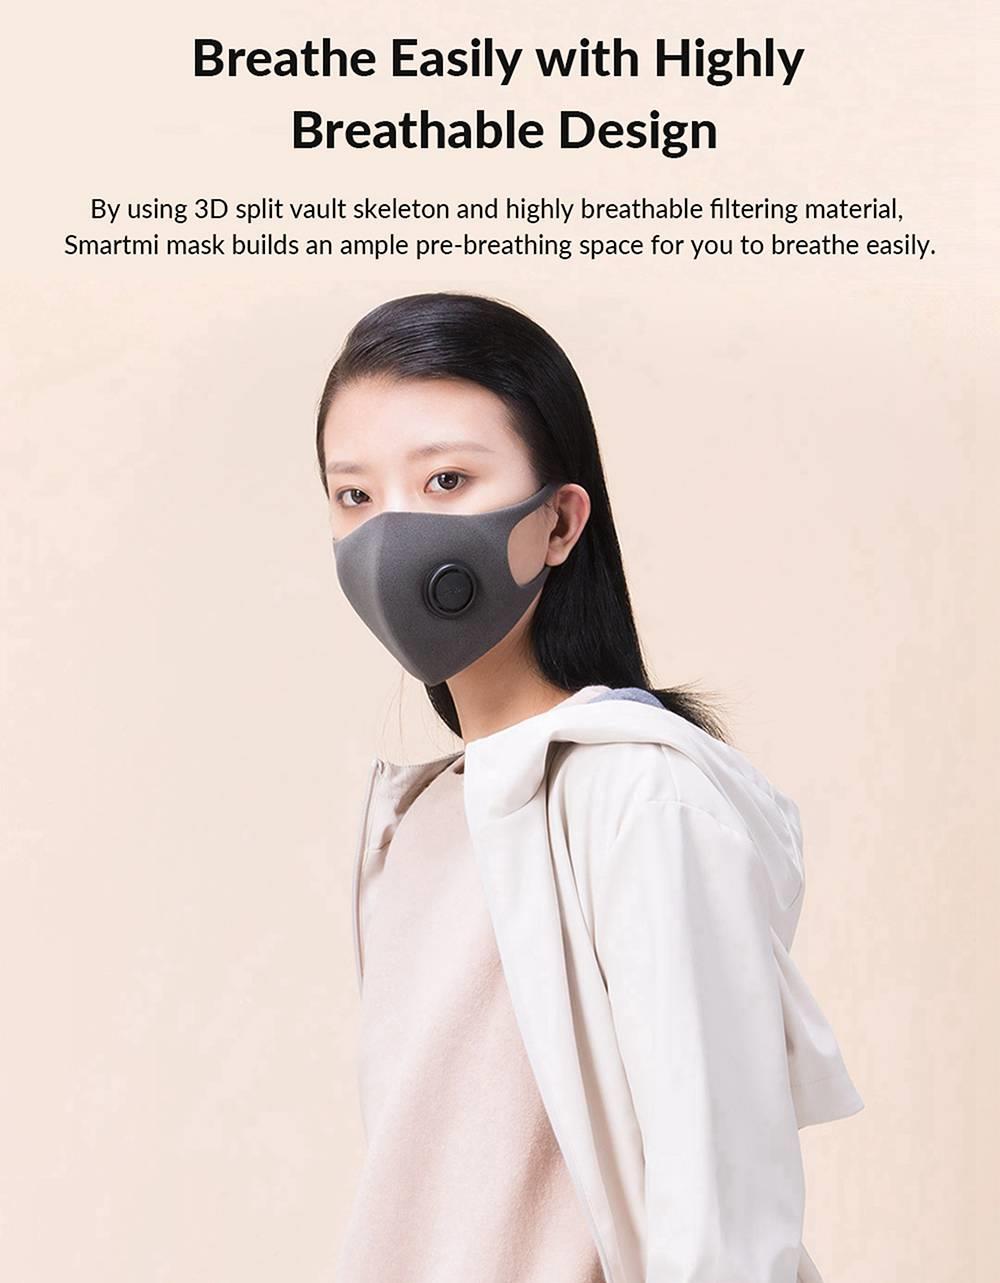 1PC Smartmi KN95 Face Mask with Breathing Valve Professional Protective Face Cover FFP2 for Anti Haze PM2.5 Dust Size L - Black